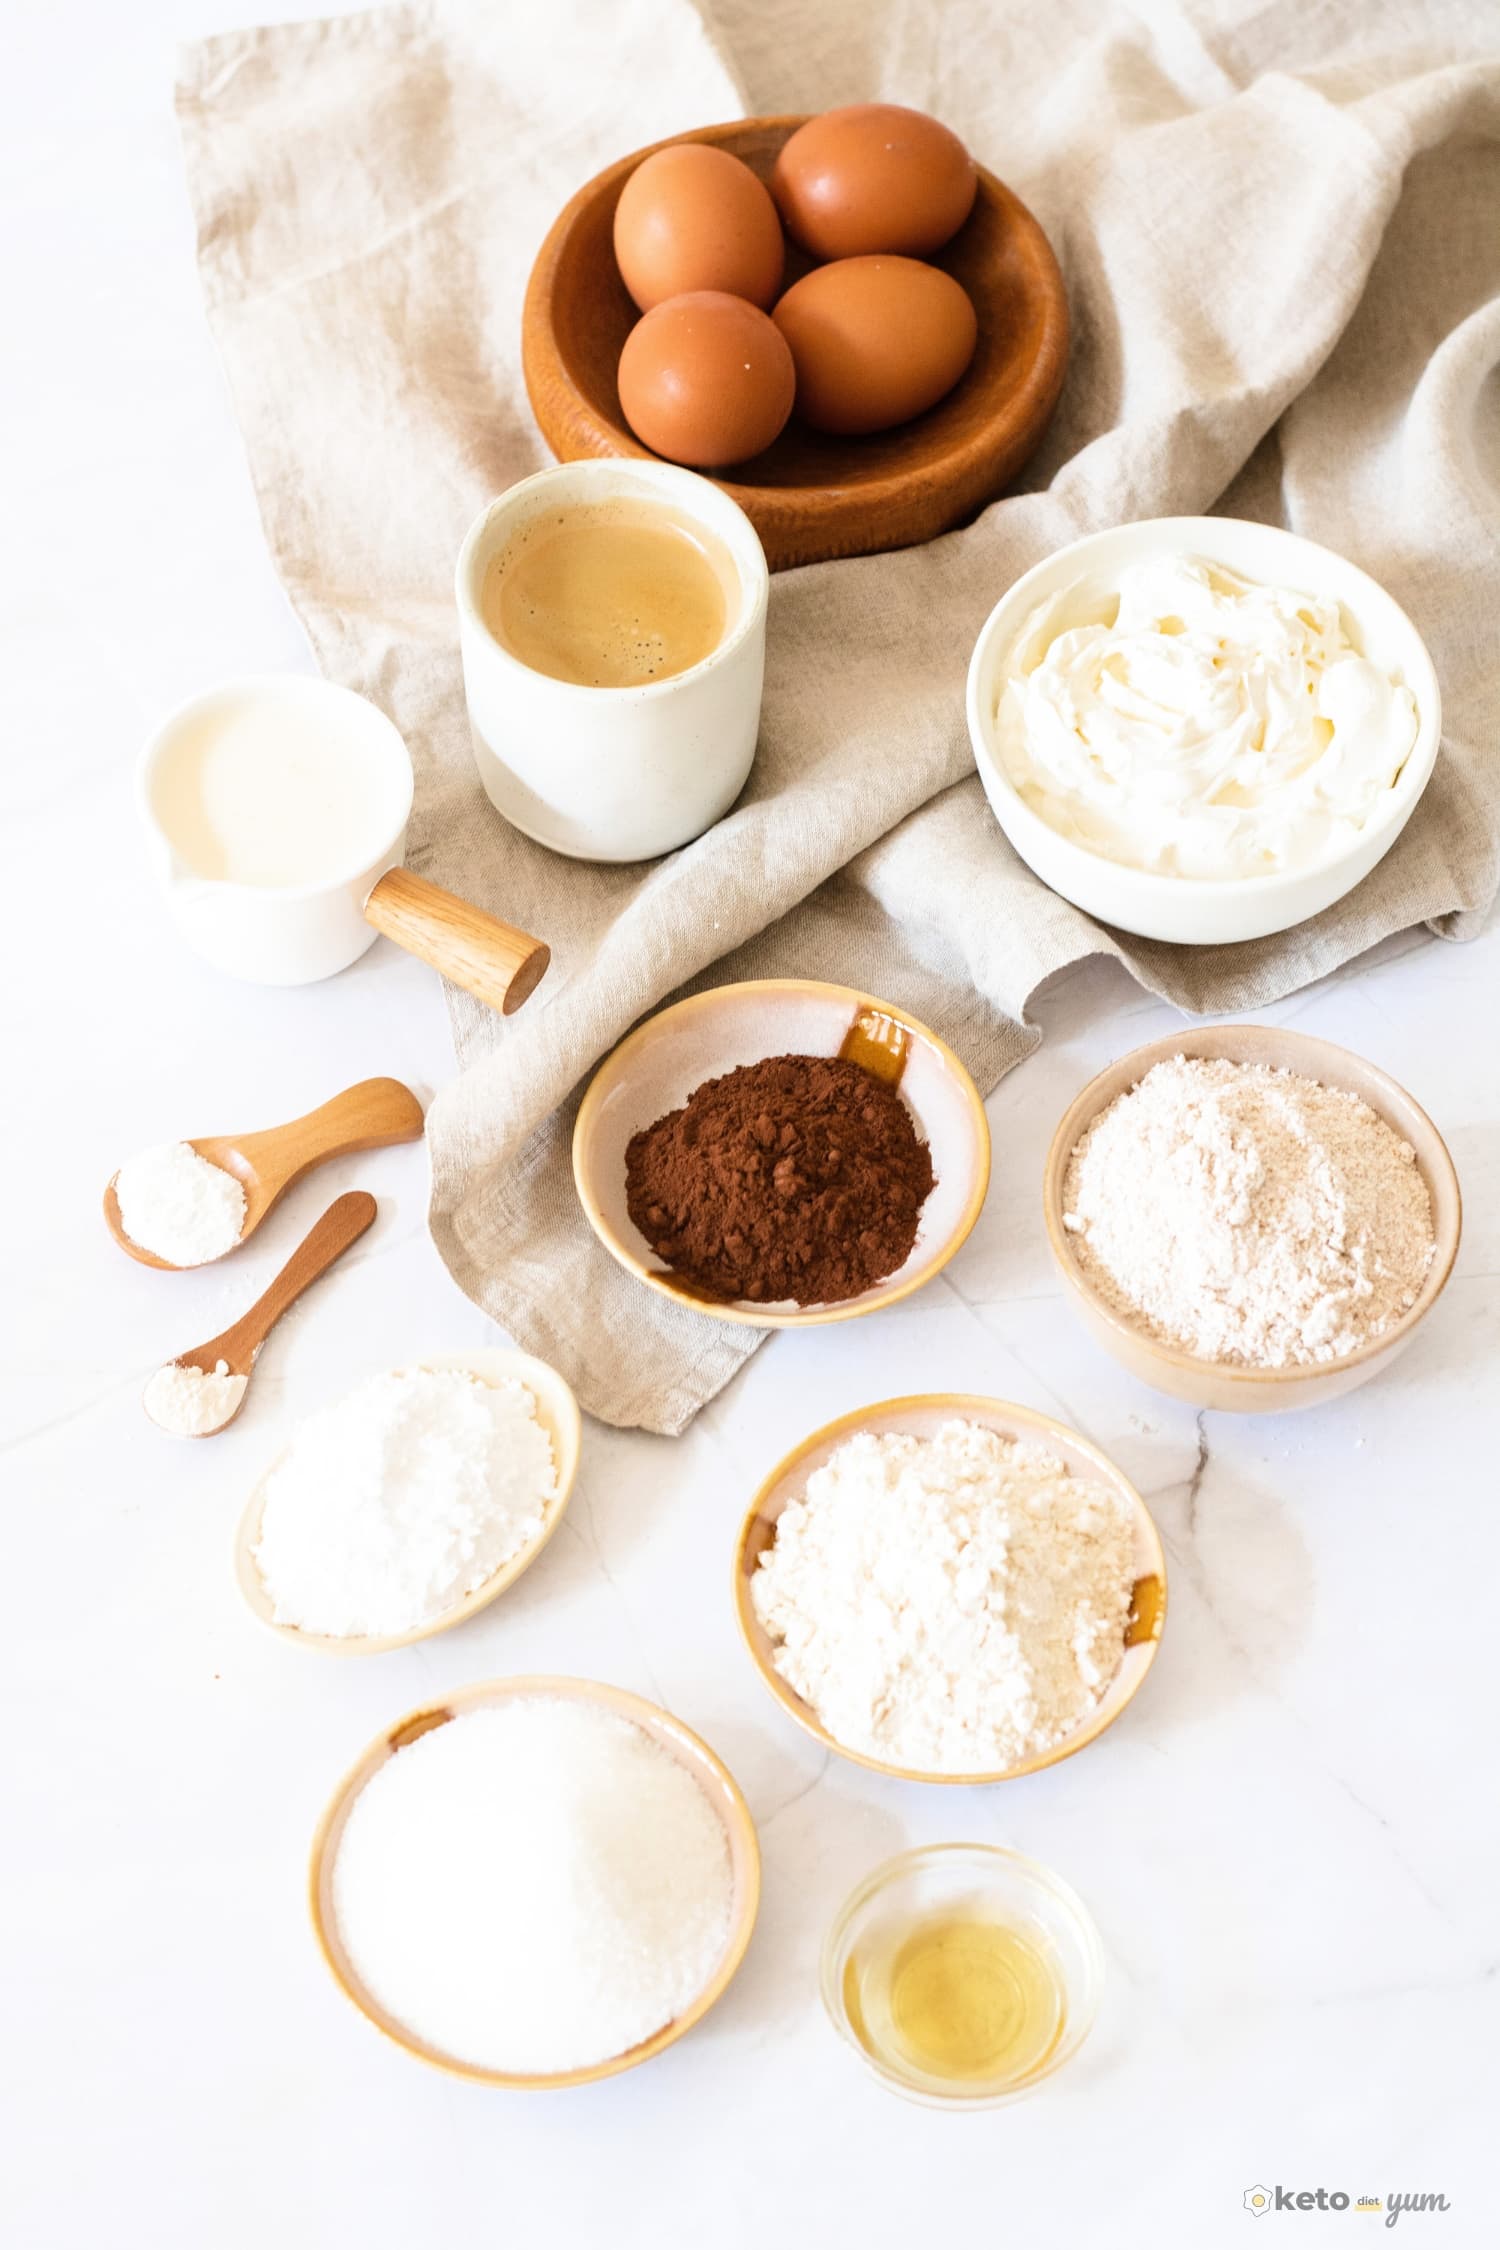 Ingredients for a keto tiramisu recipe laid out on a white surface, including eggs, almond flour, cocoa powder, and cream.